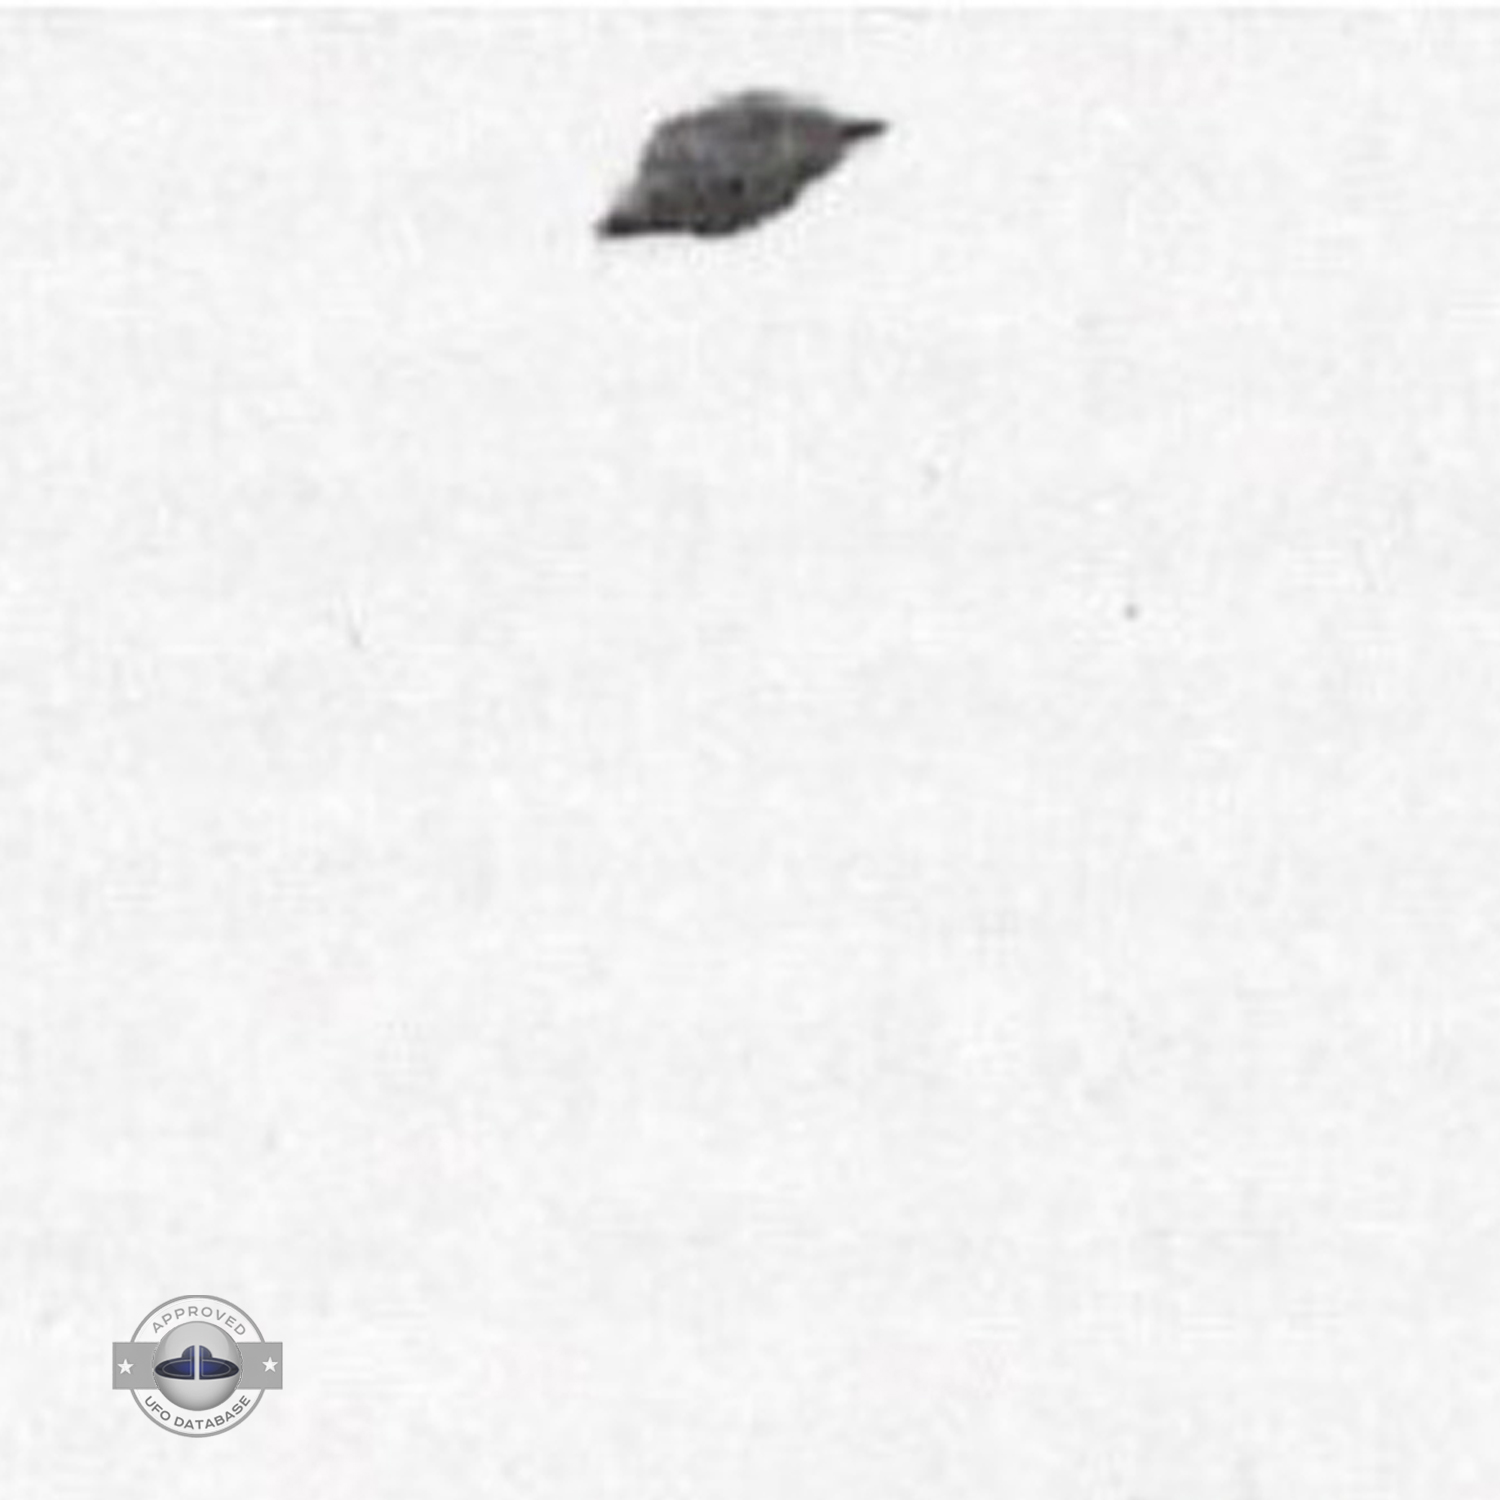 UFO sighting occurred in a small town Vidnoye in the Moscow Oblast UFO Picture #159-3